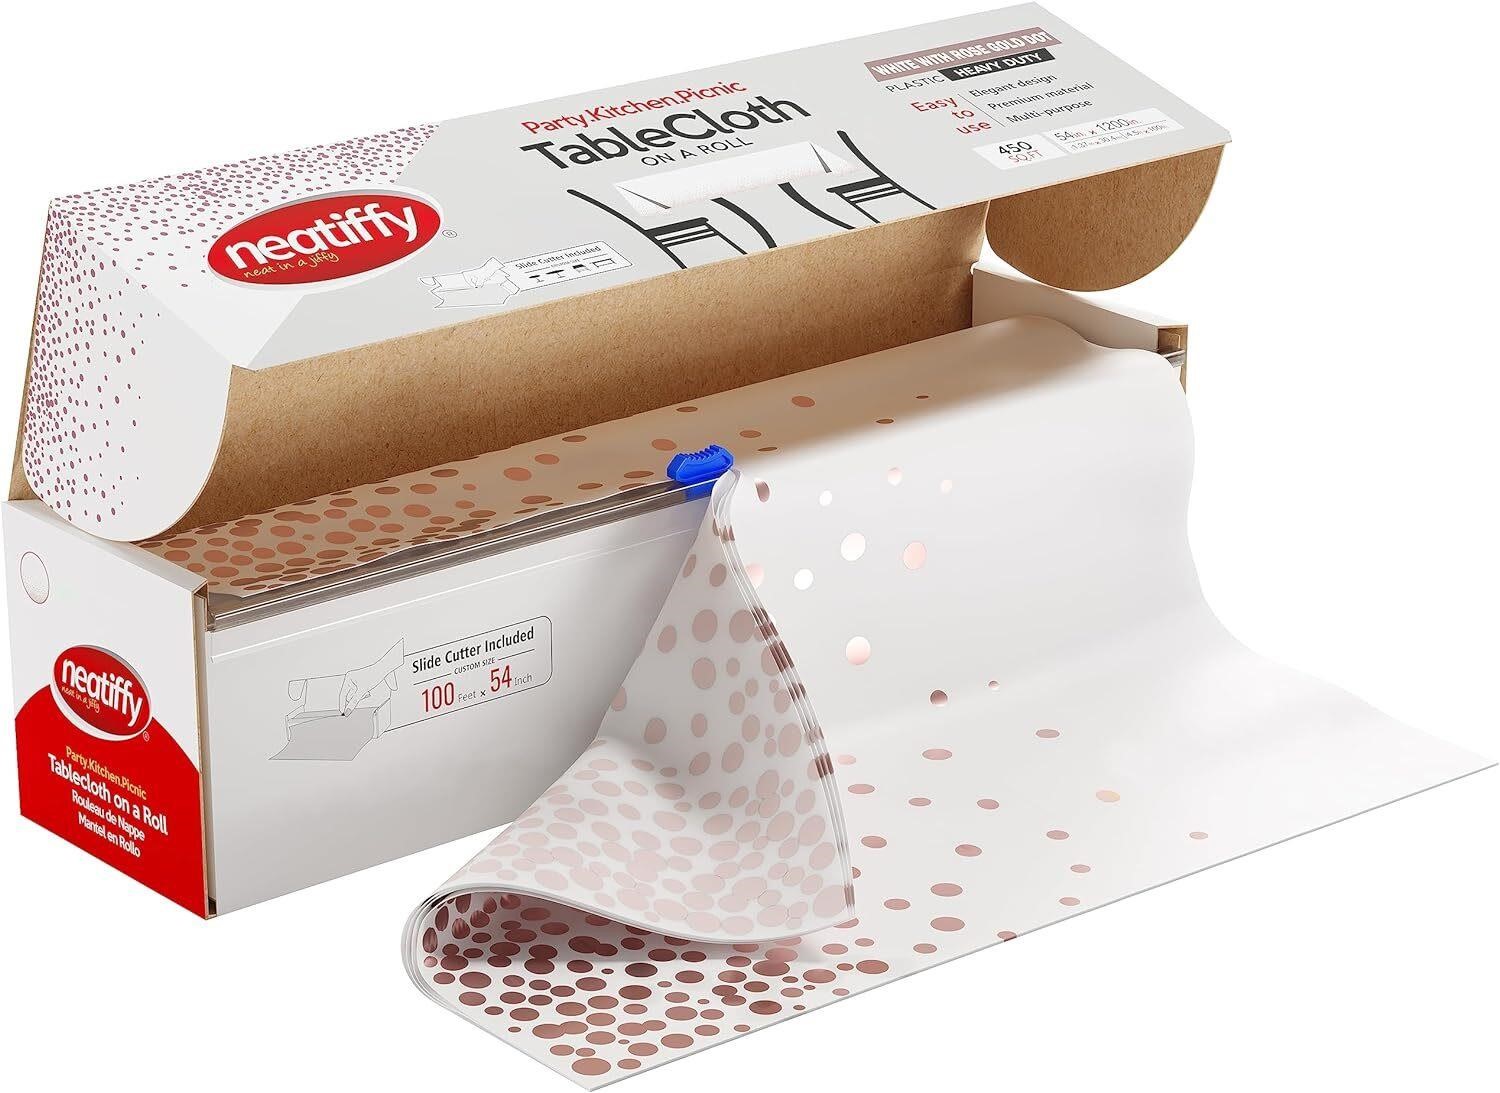 Neatiffy Table Cloth Roll - White Rose Gold Dots